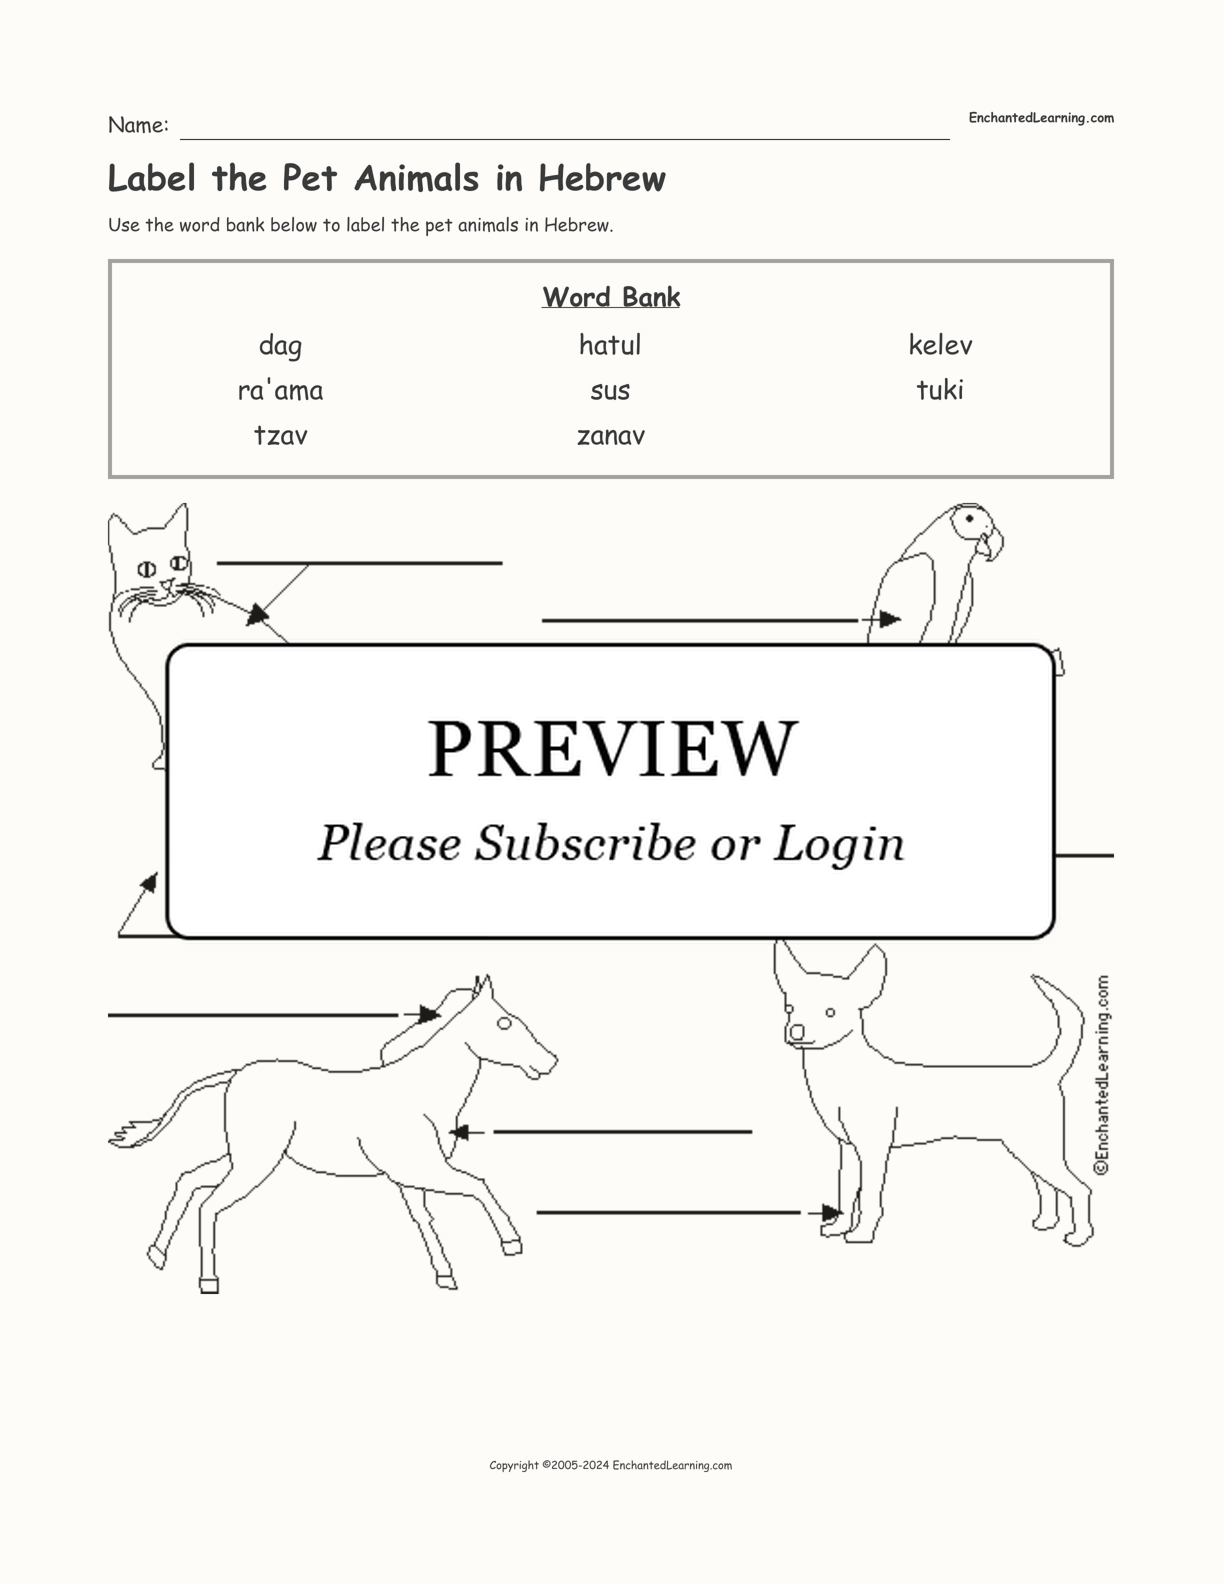 Label the Pet Animals in Hebrew interactive worksheet page 1